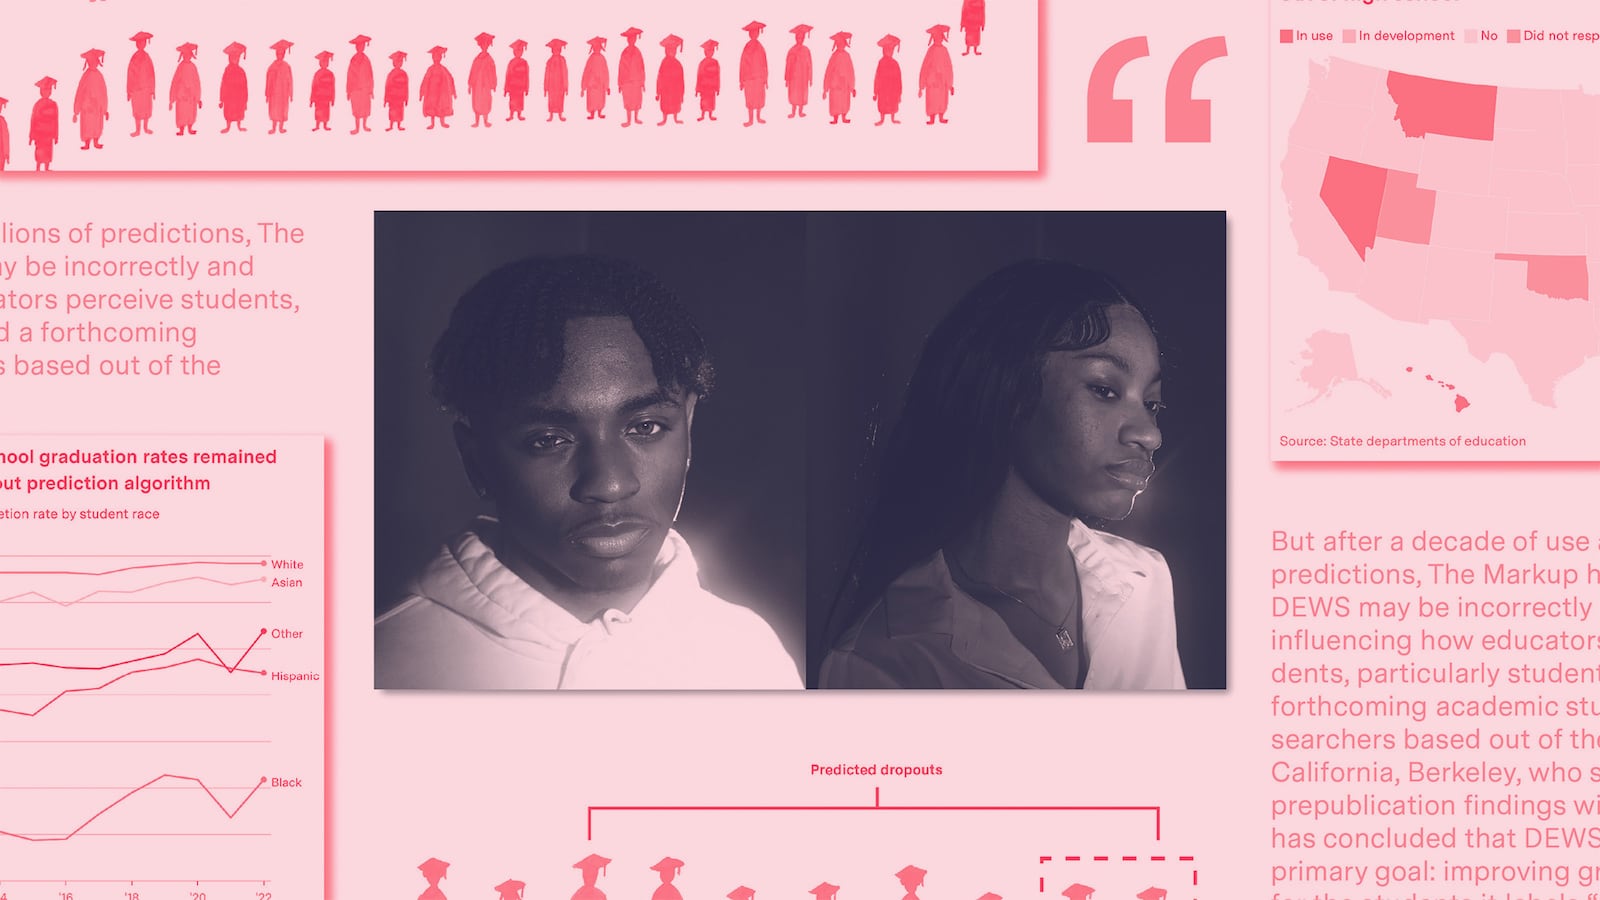 A portrait of two Black teenagers sits in the center of a large illustration.